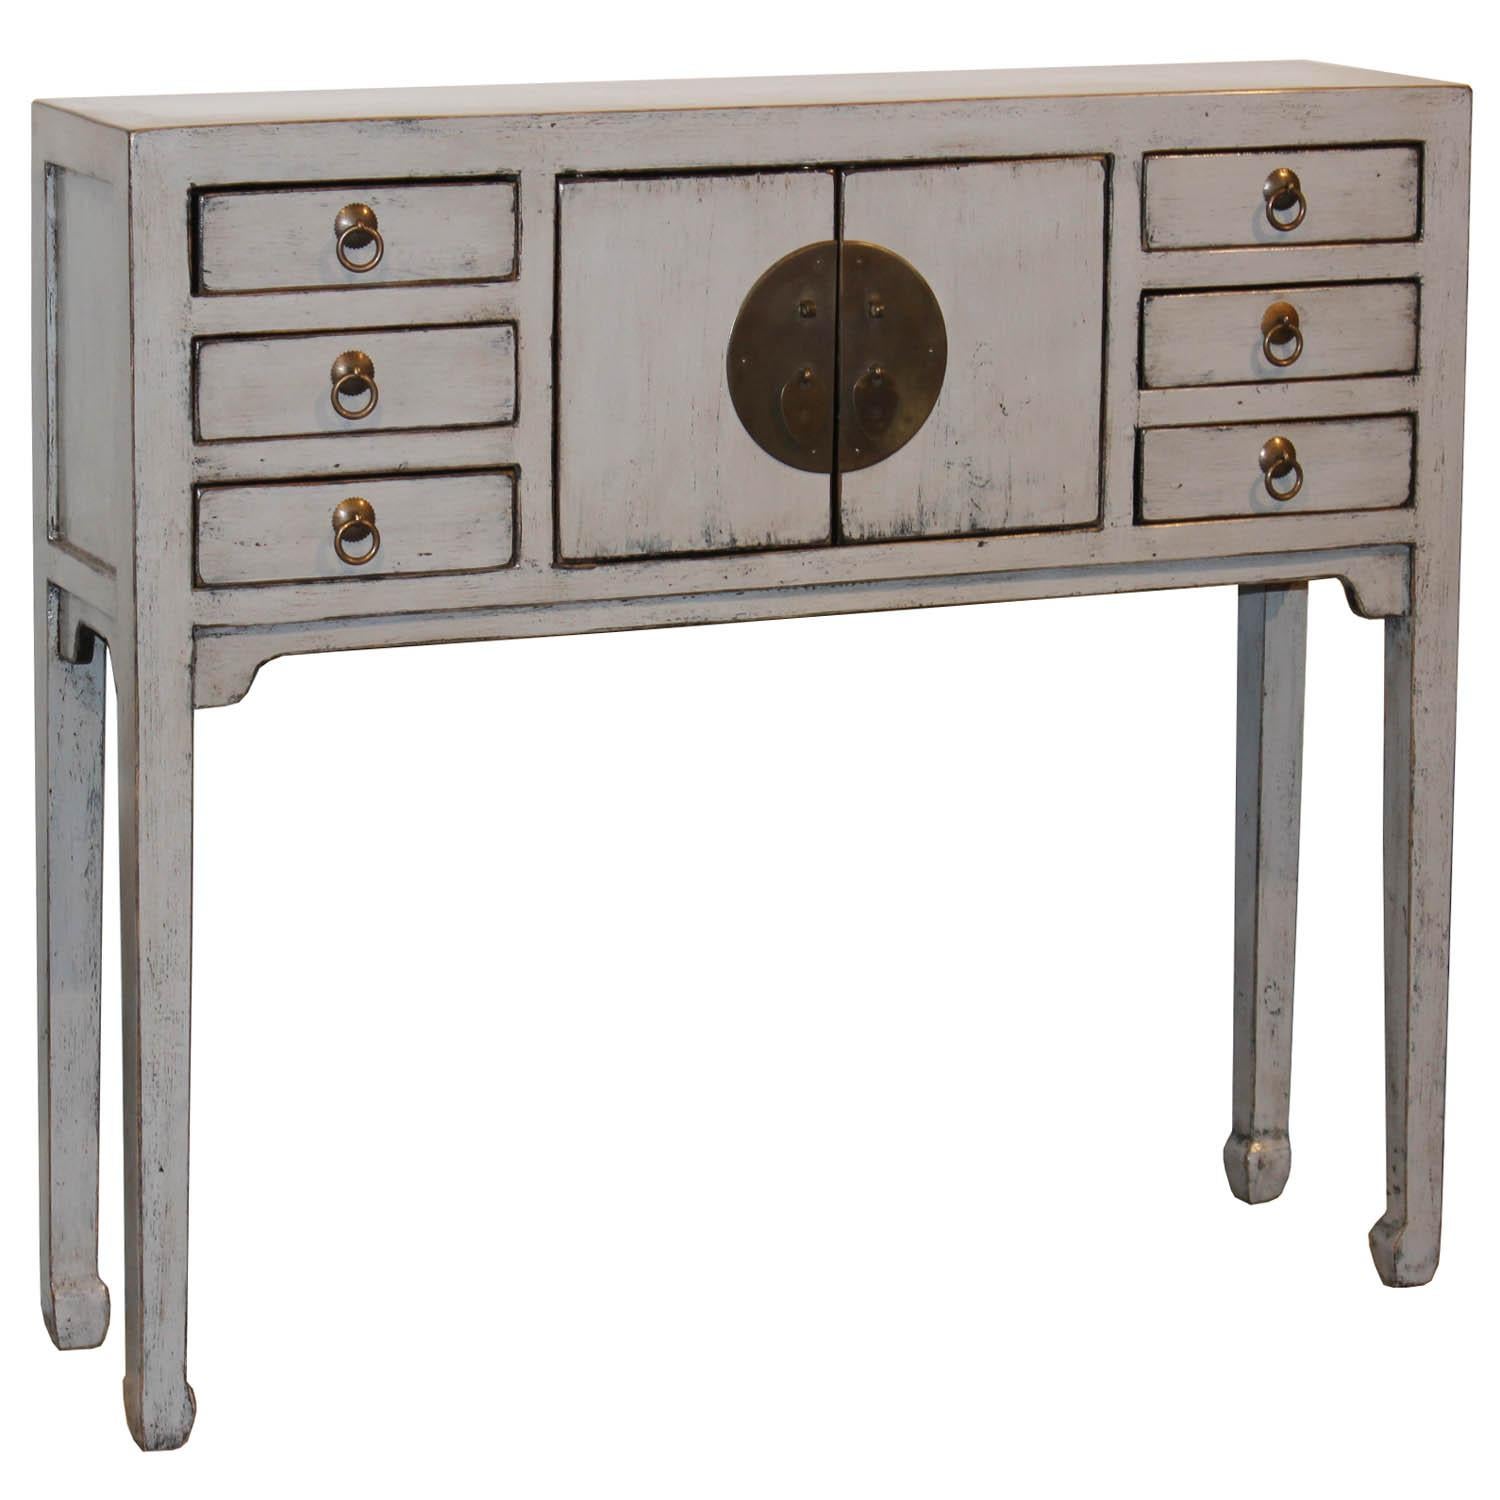 Contemporary gray lacquer console table with two doors, six small drawers and horse hoof-style legs. Perfect as an entry way piece or at the end of a hallway.